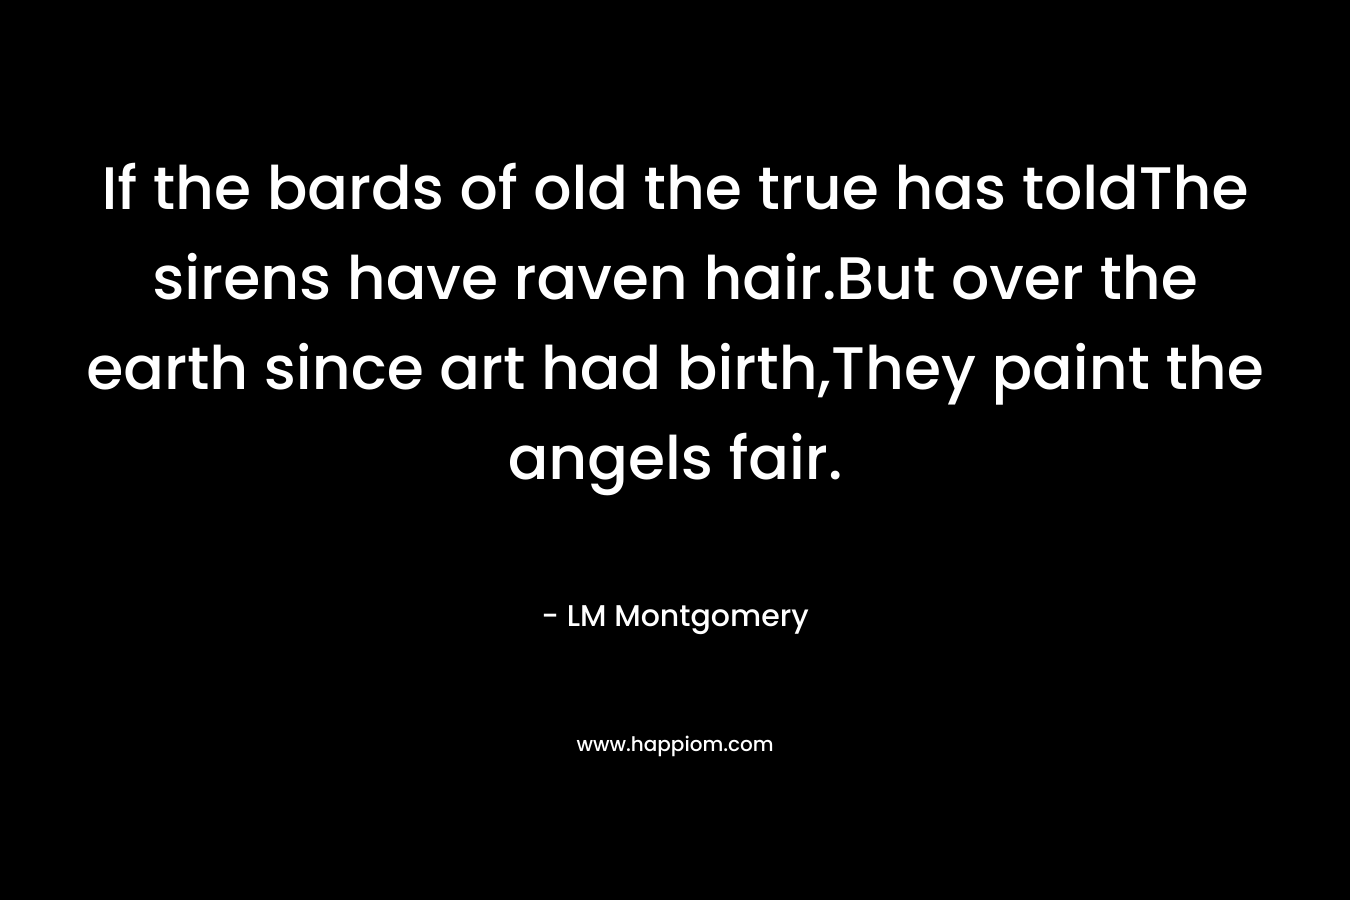 If the bards of old the true has toldThe sirens have raven hair.But over the earth since art had birth,They paint the angels fair. – LM Montgomery